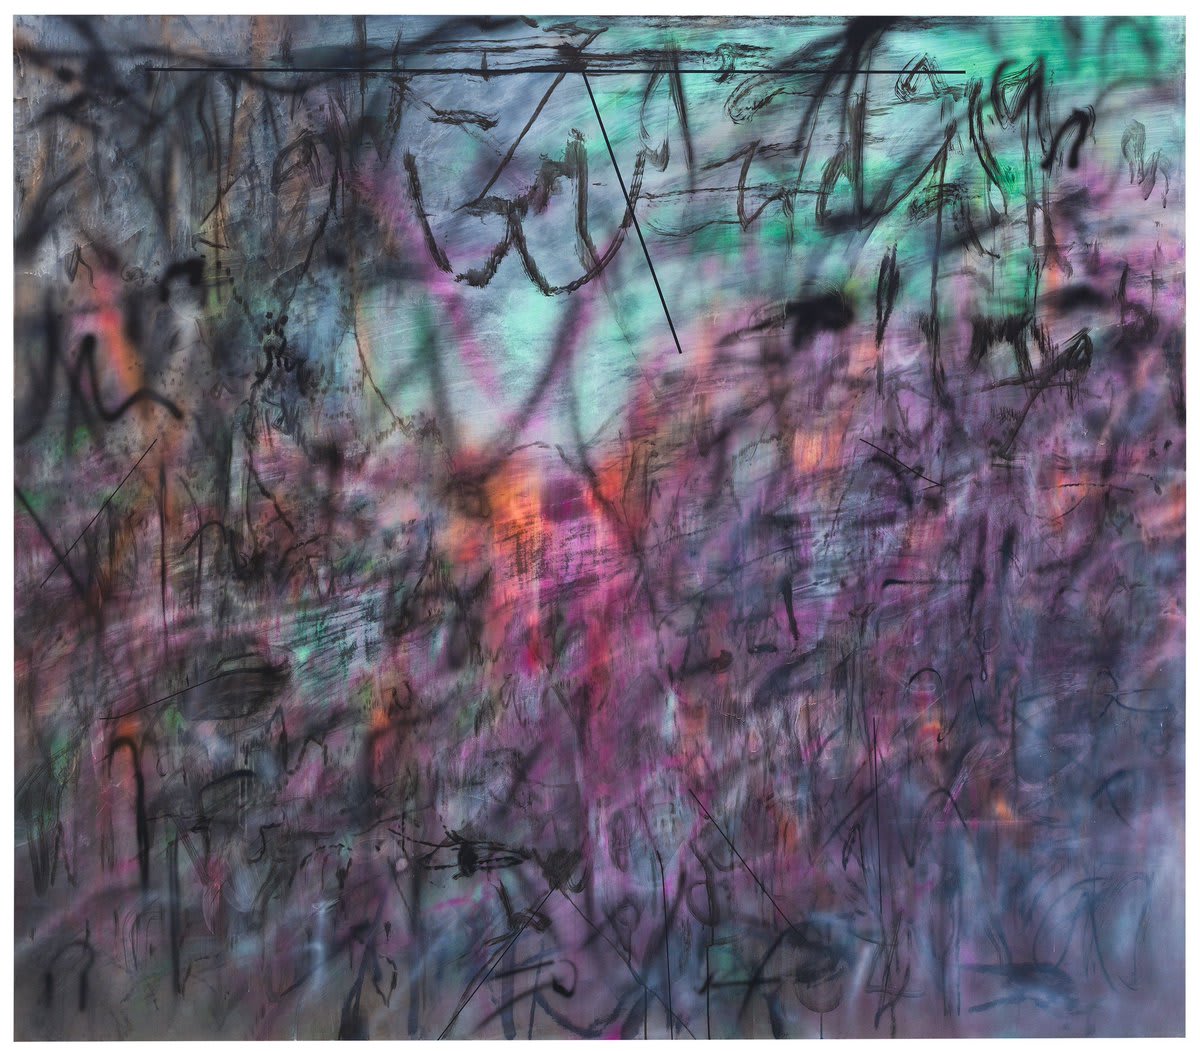 The first-ever comprehensive retrospective of @JulieMehretu’s career, "Julie Mehretu" will unite 40 works on paper with 35 paintings to examine history, colonialism, capitalism, geopolitics, war, global uprising, diaspora, and displacement. Opening 11/3.